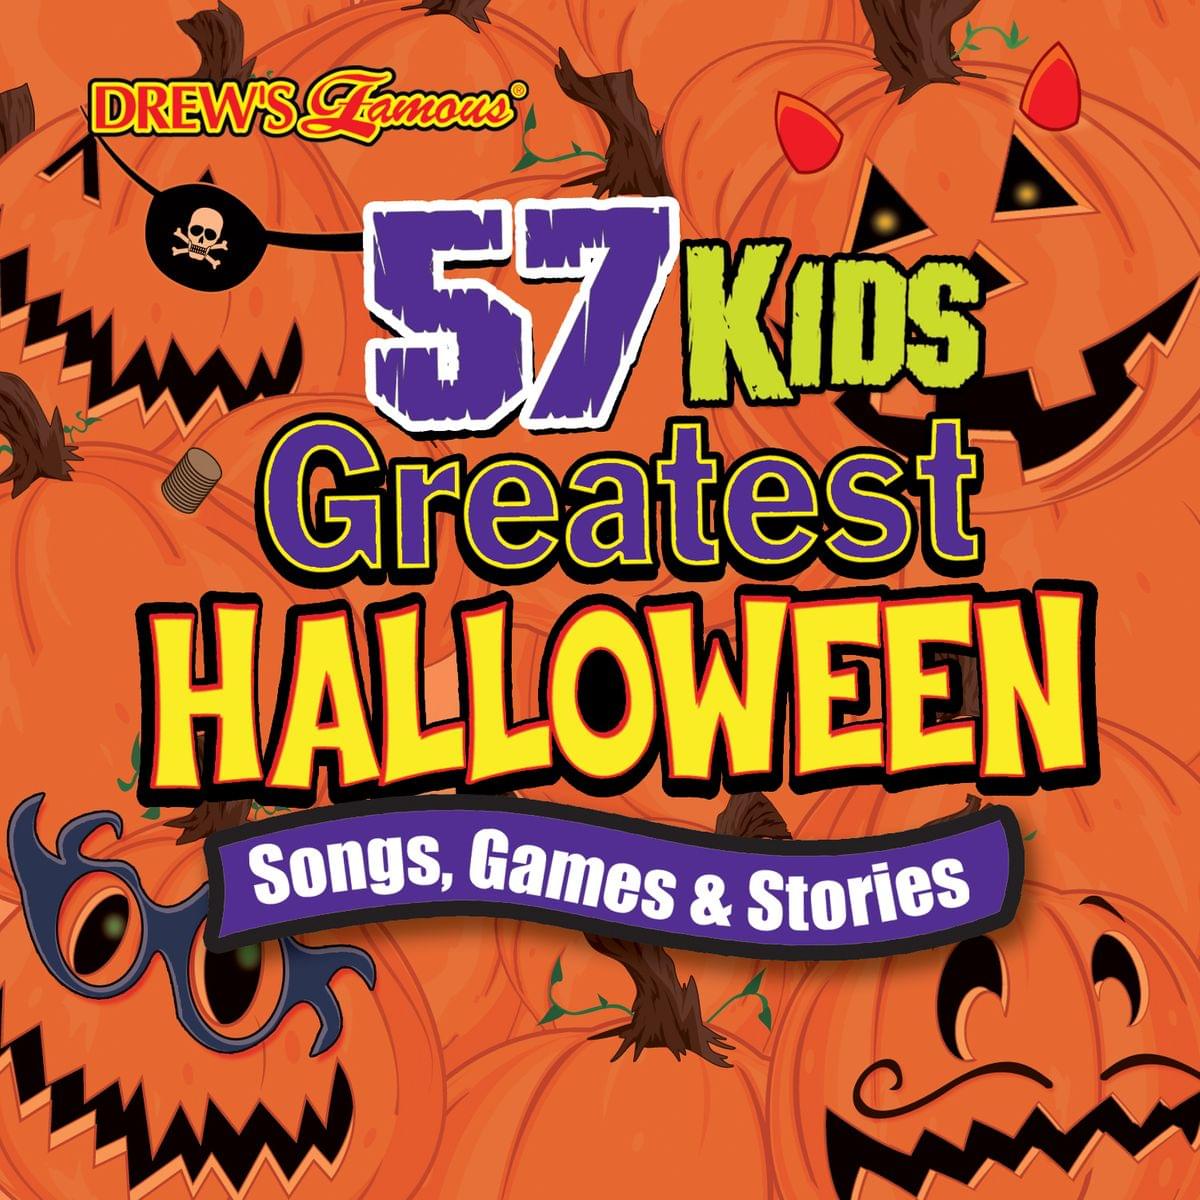 57 Kids Greatest Halloween Party Music, Games & Stories Cd